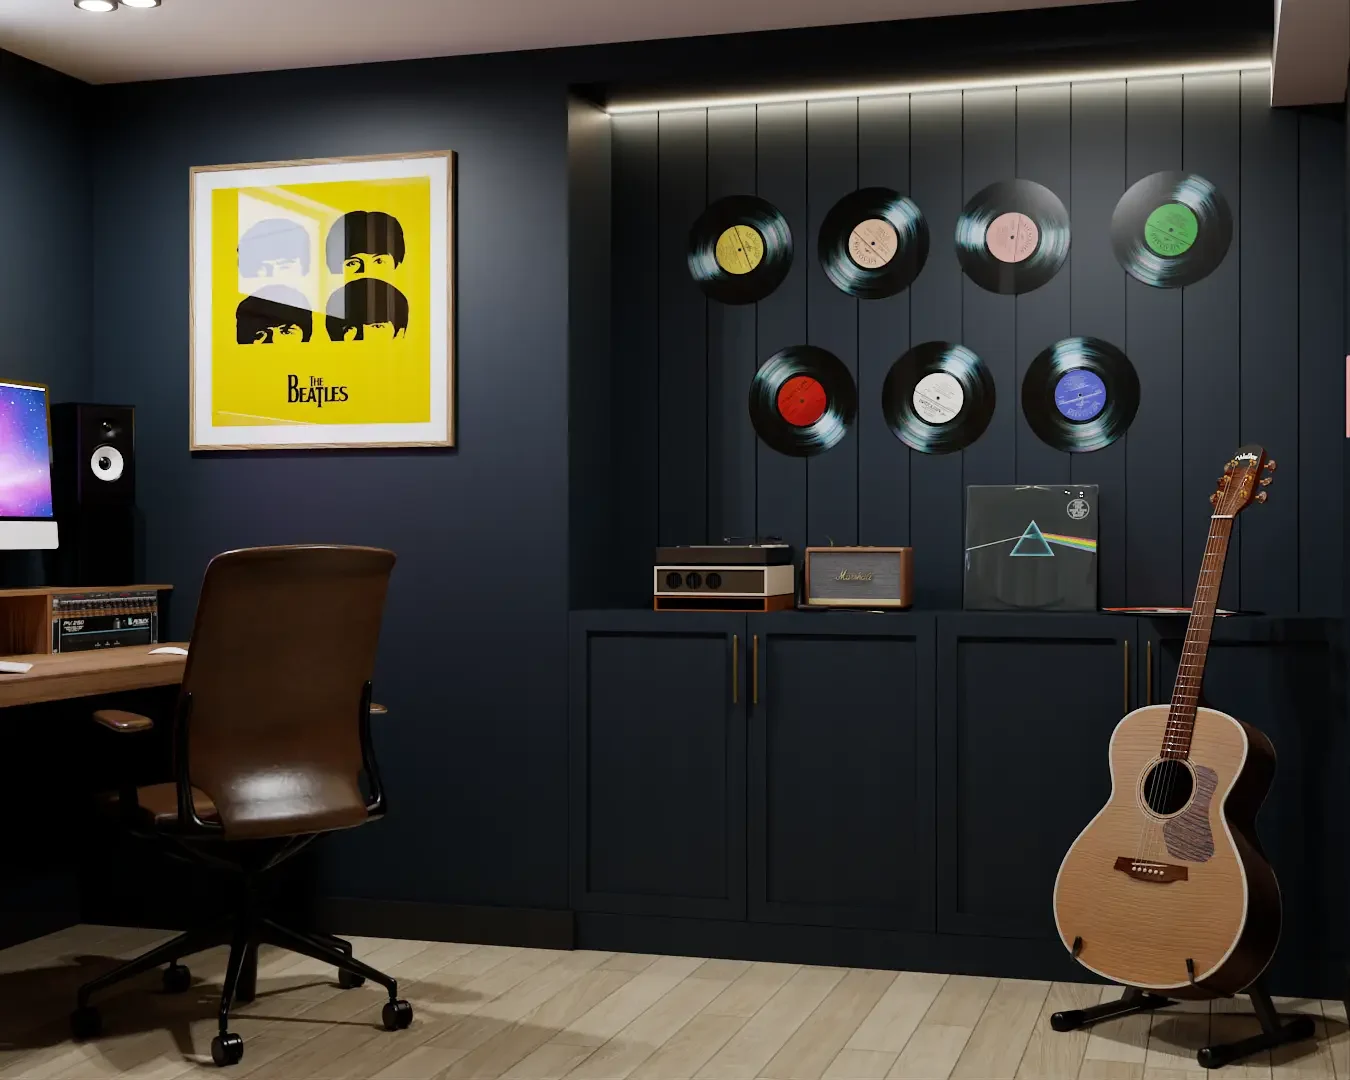 A stylish music room featuring a record display on a navy wall, a cozy workspace with a desk and computer, and a guitar. The space is perfect for music enthusiasts. Design by Debora, an online interior design service.